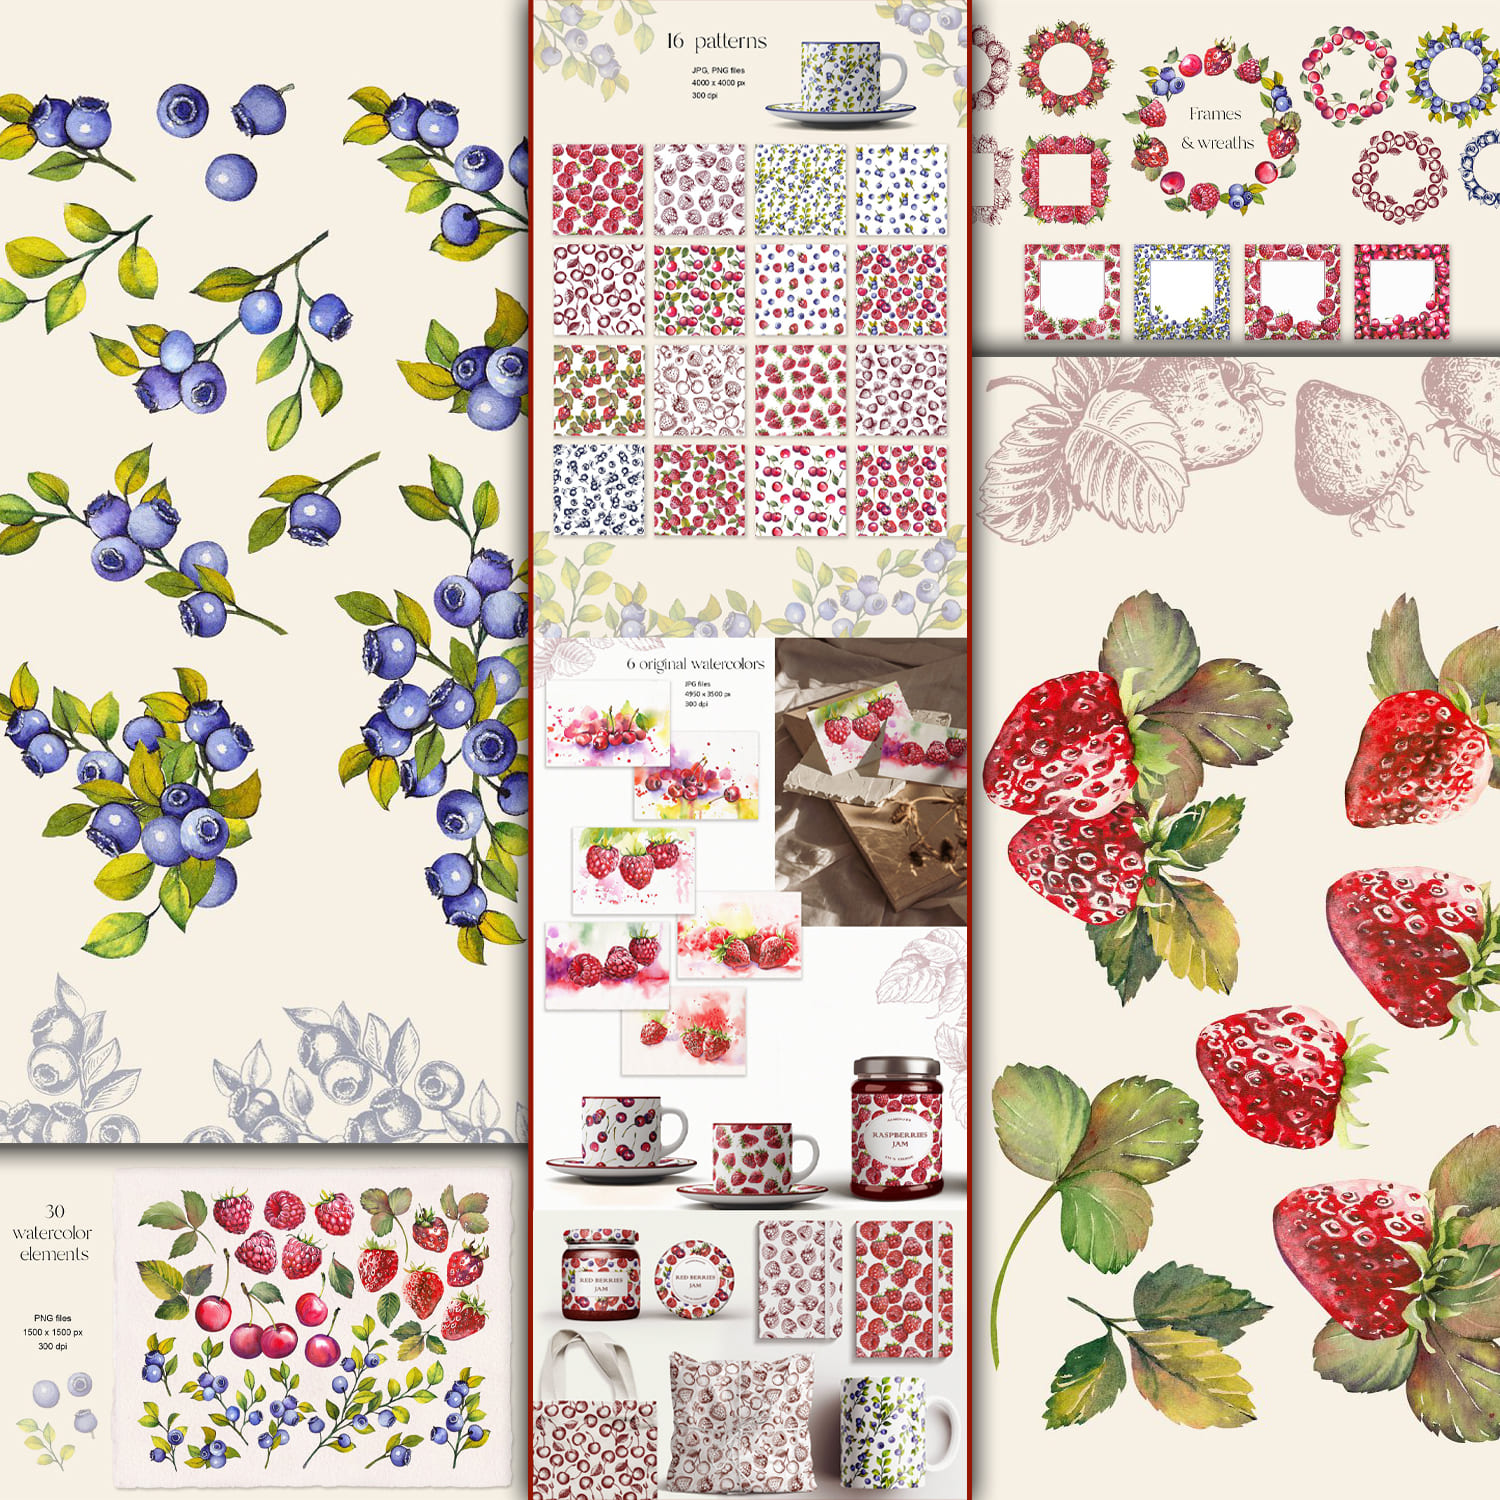 Patterns with a berry design are realistically and highly artistically drawn.